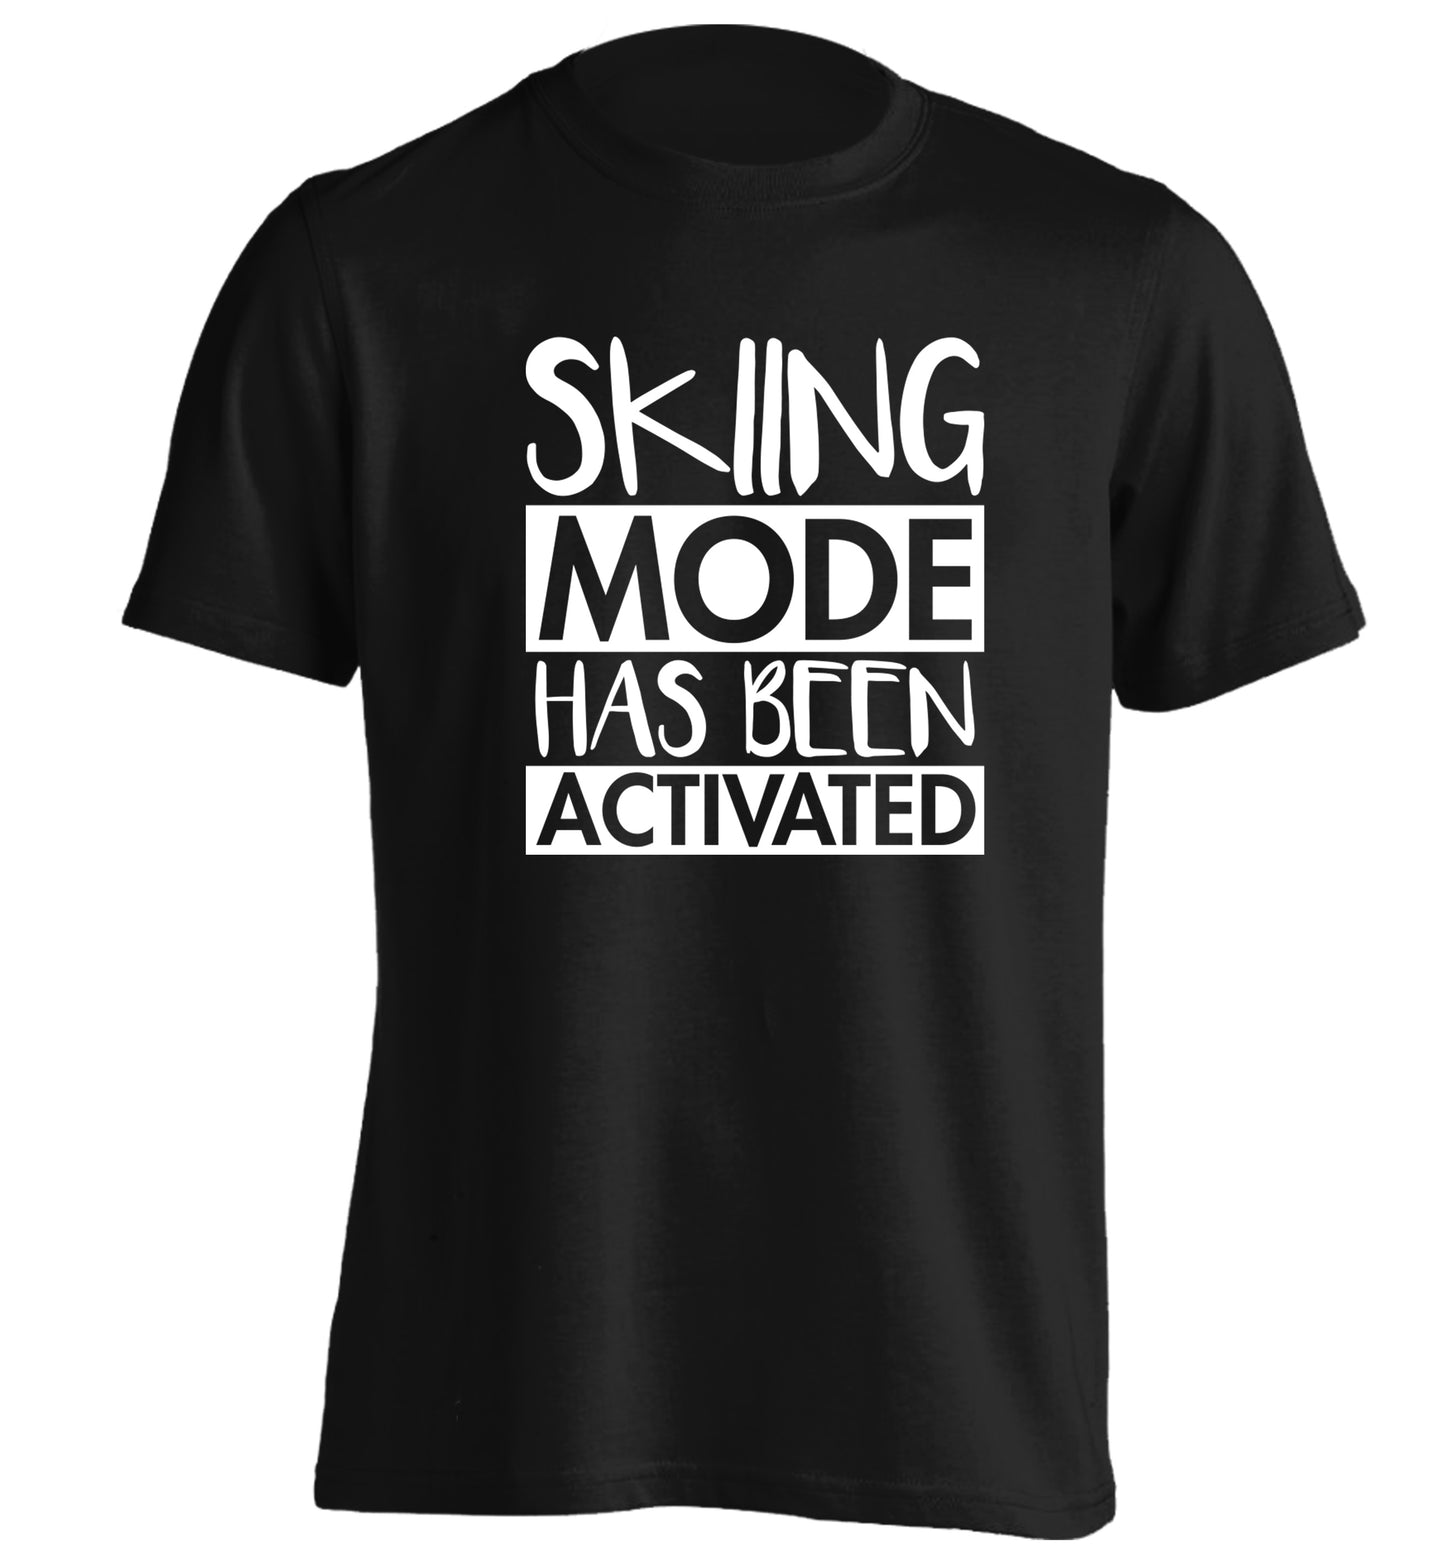 Skiing mode activated adults unisexblack Tshirt 2XL